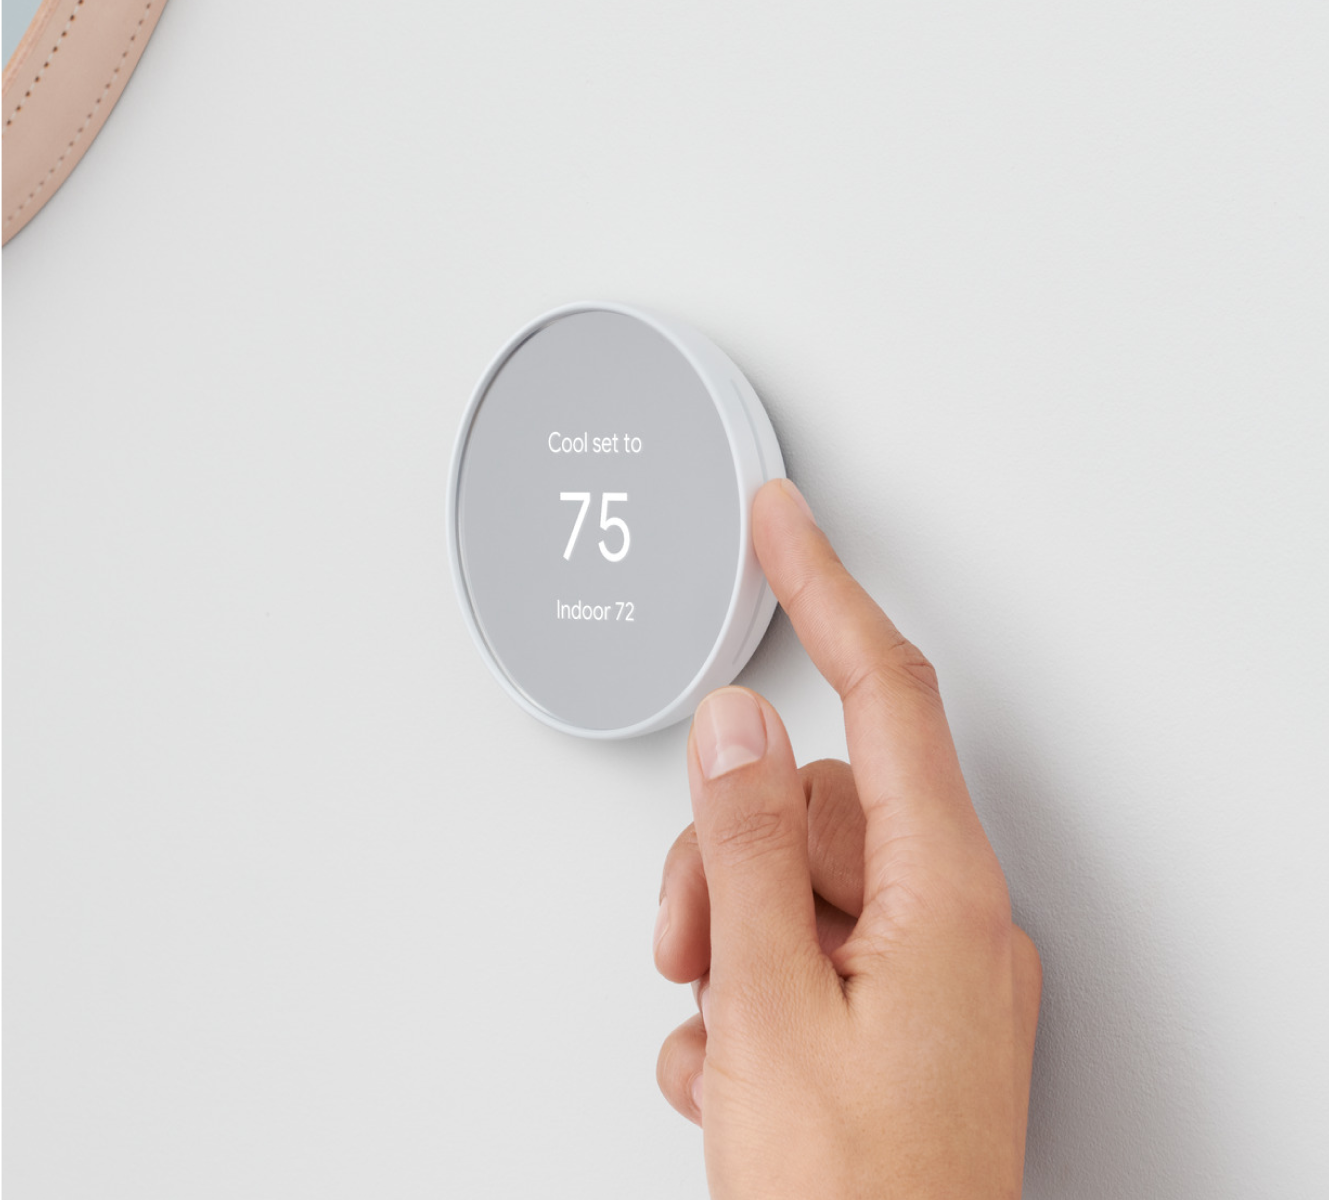 Google Nest Thermostat on a wall with a hand adjusting the temperature 